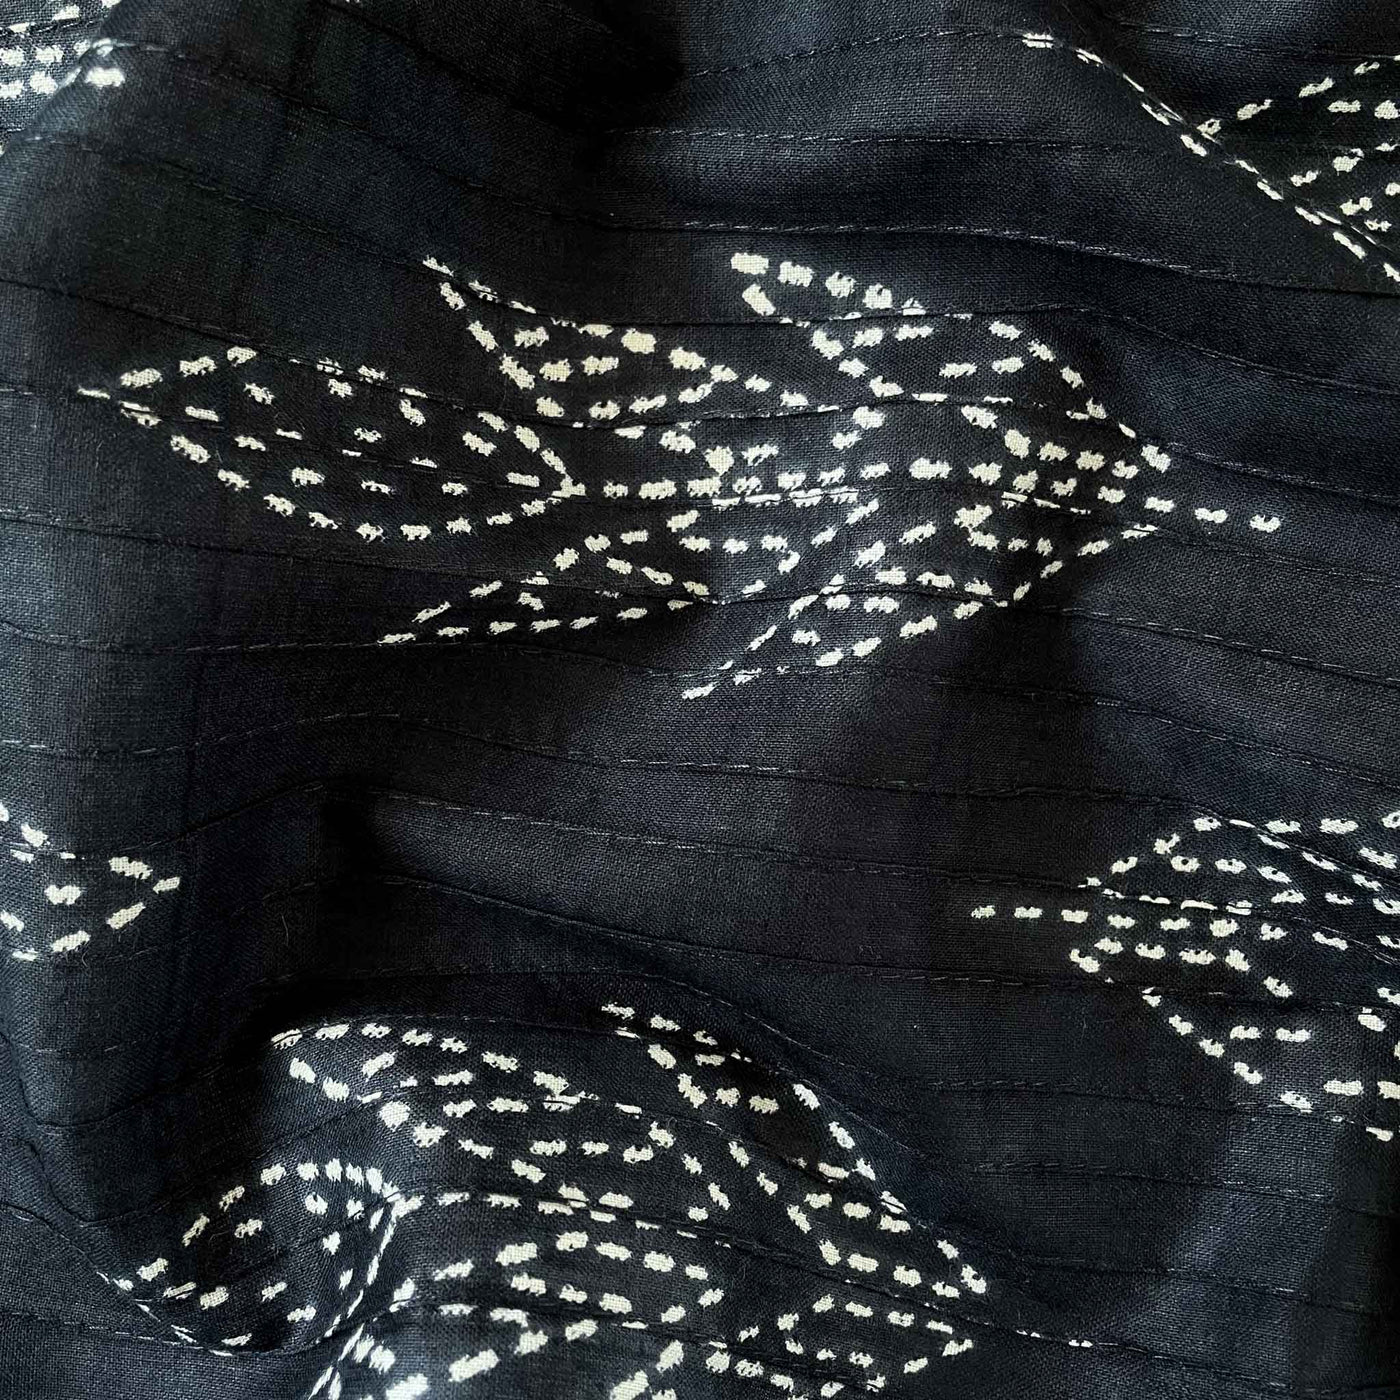 Fabric Pandit Fabric Black and White Leaf Pattern with Pintucks Hand Block Printed Pure Cotton Fabric (Width 36 inches)